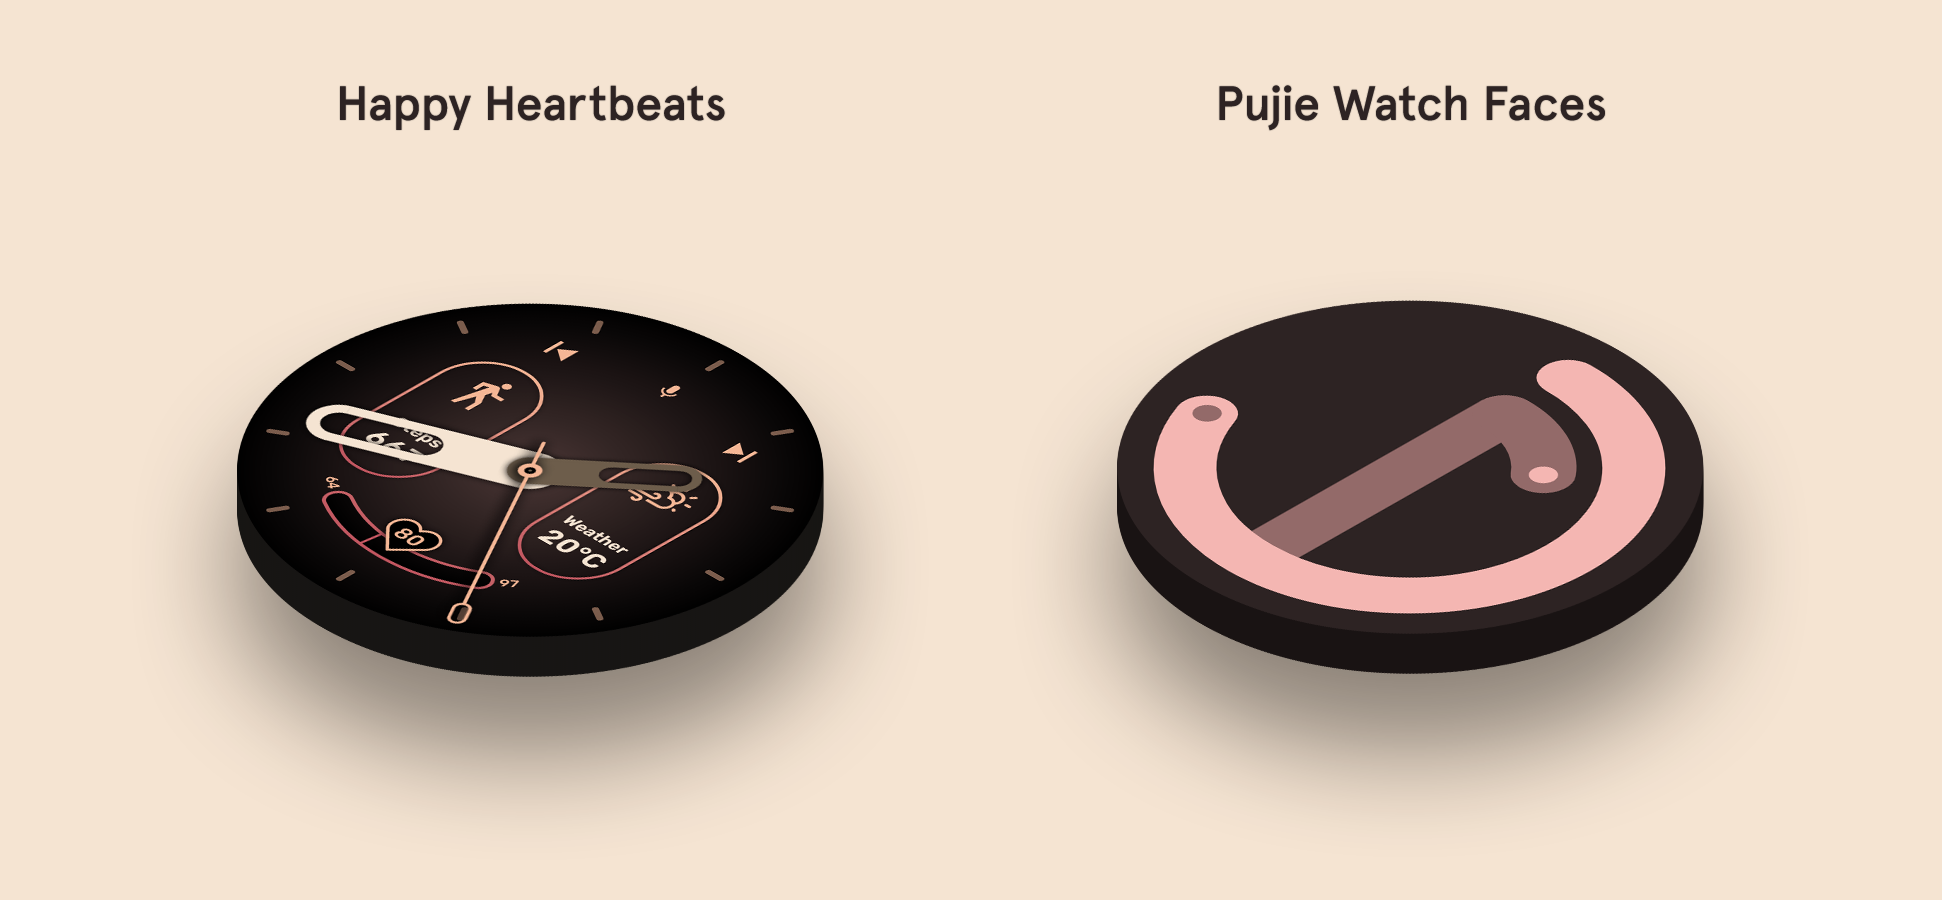 Happy Heartbeats and Pujie Watch Faces